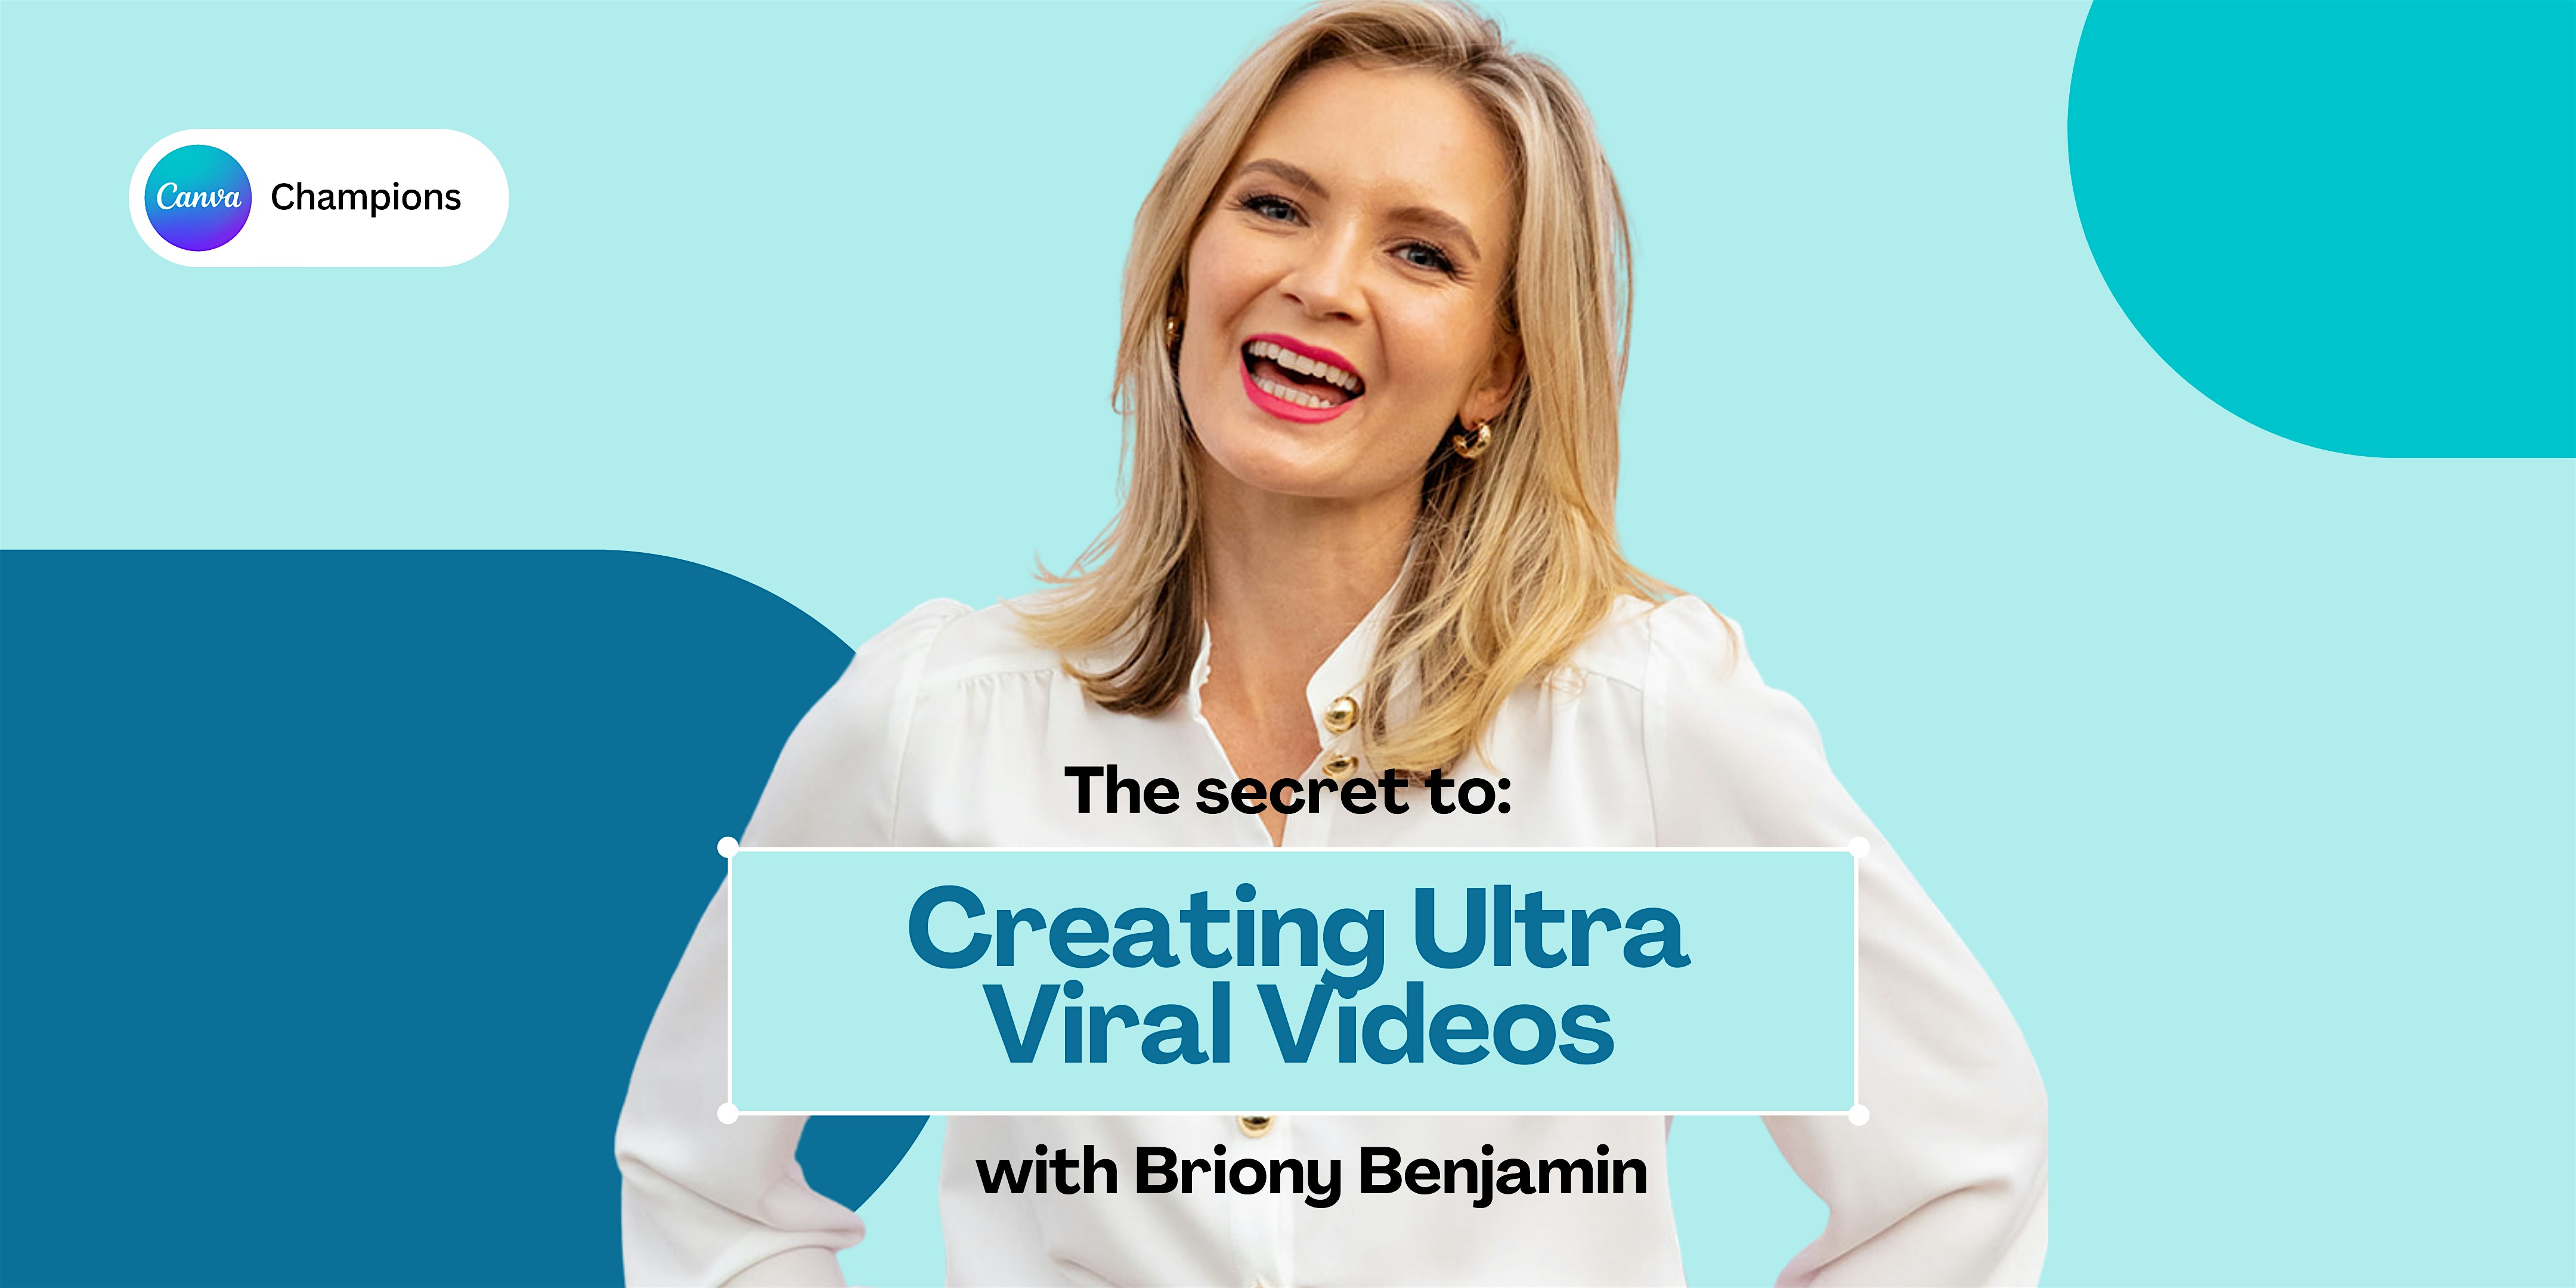 Creating Ultra Viral Videos with Briony Benjamin